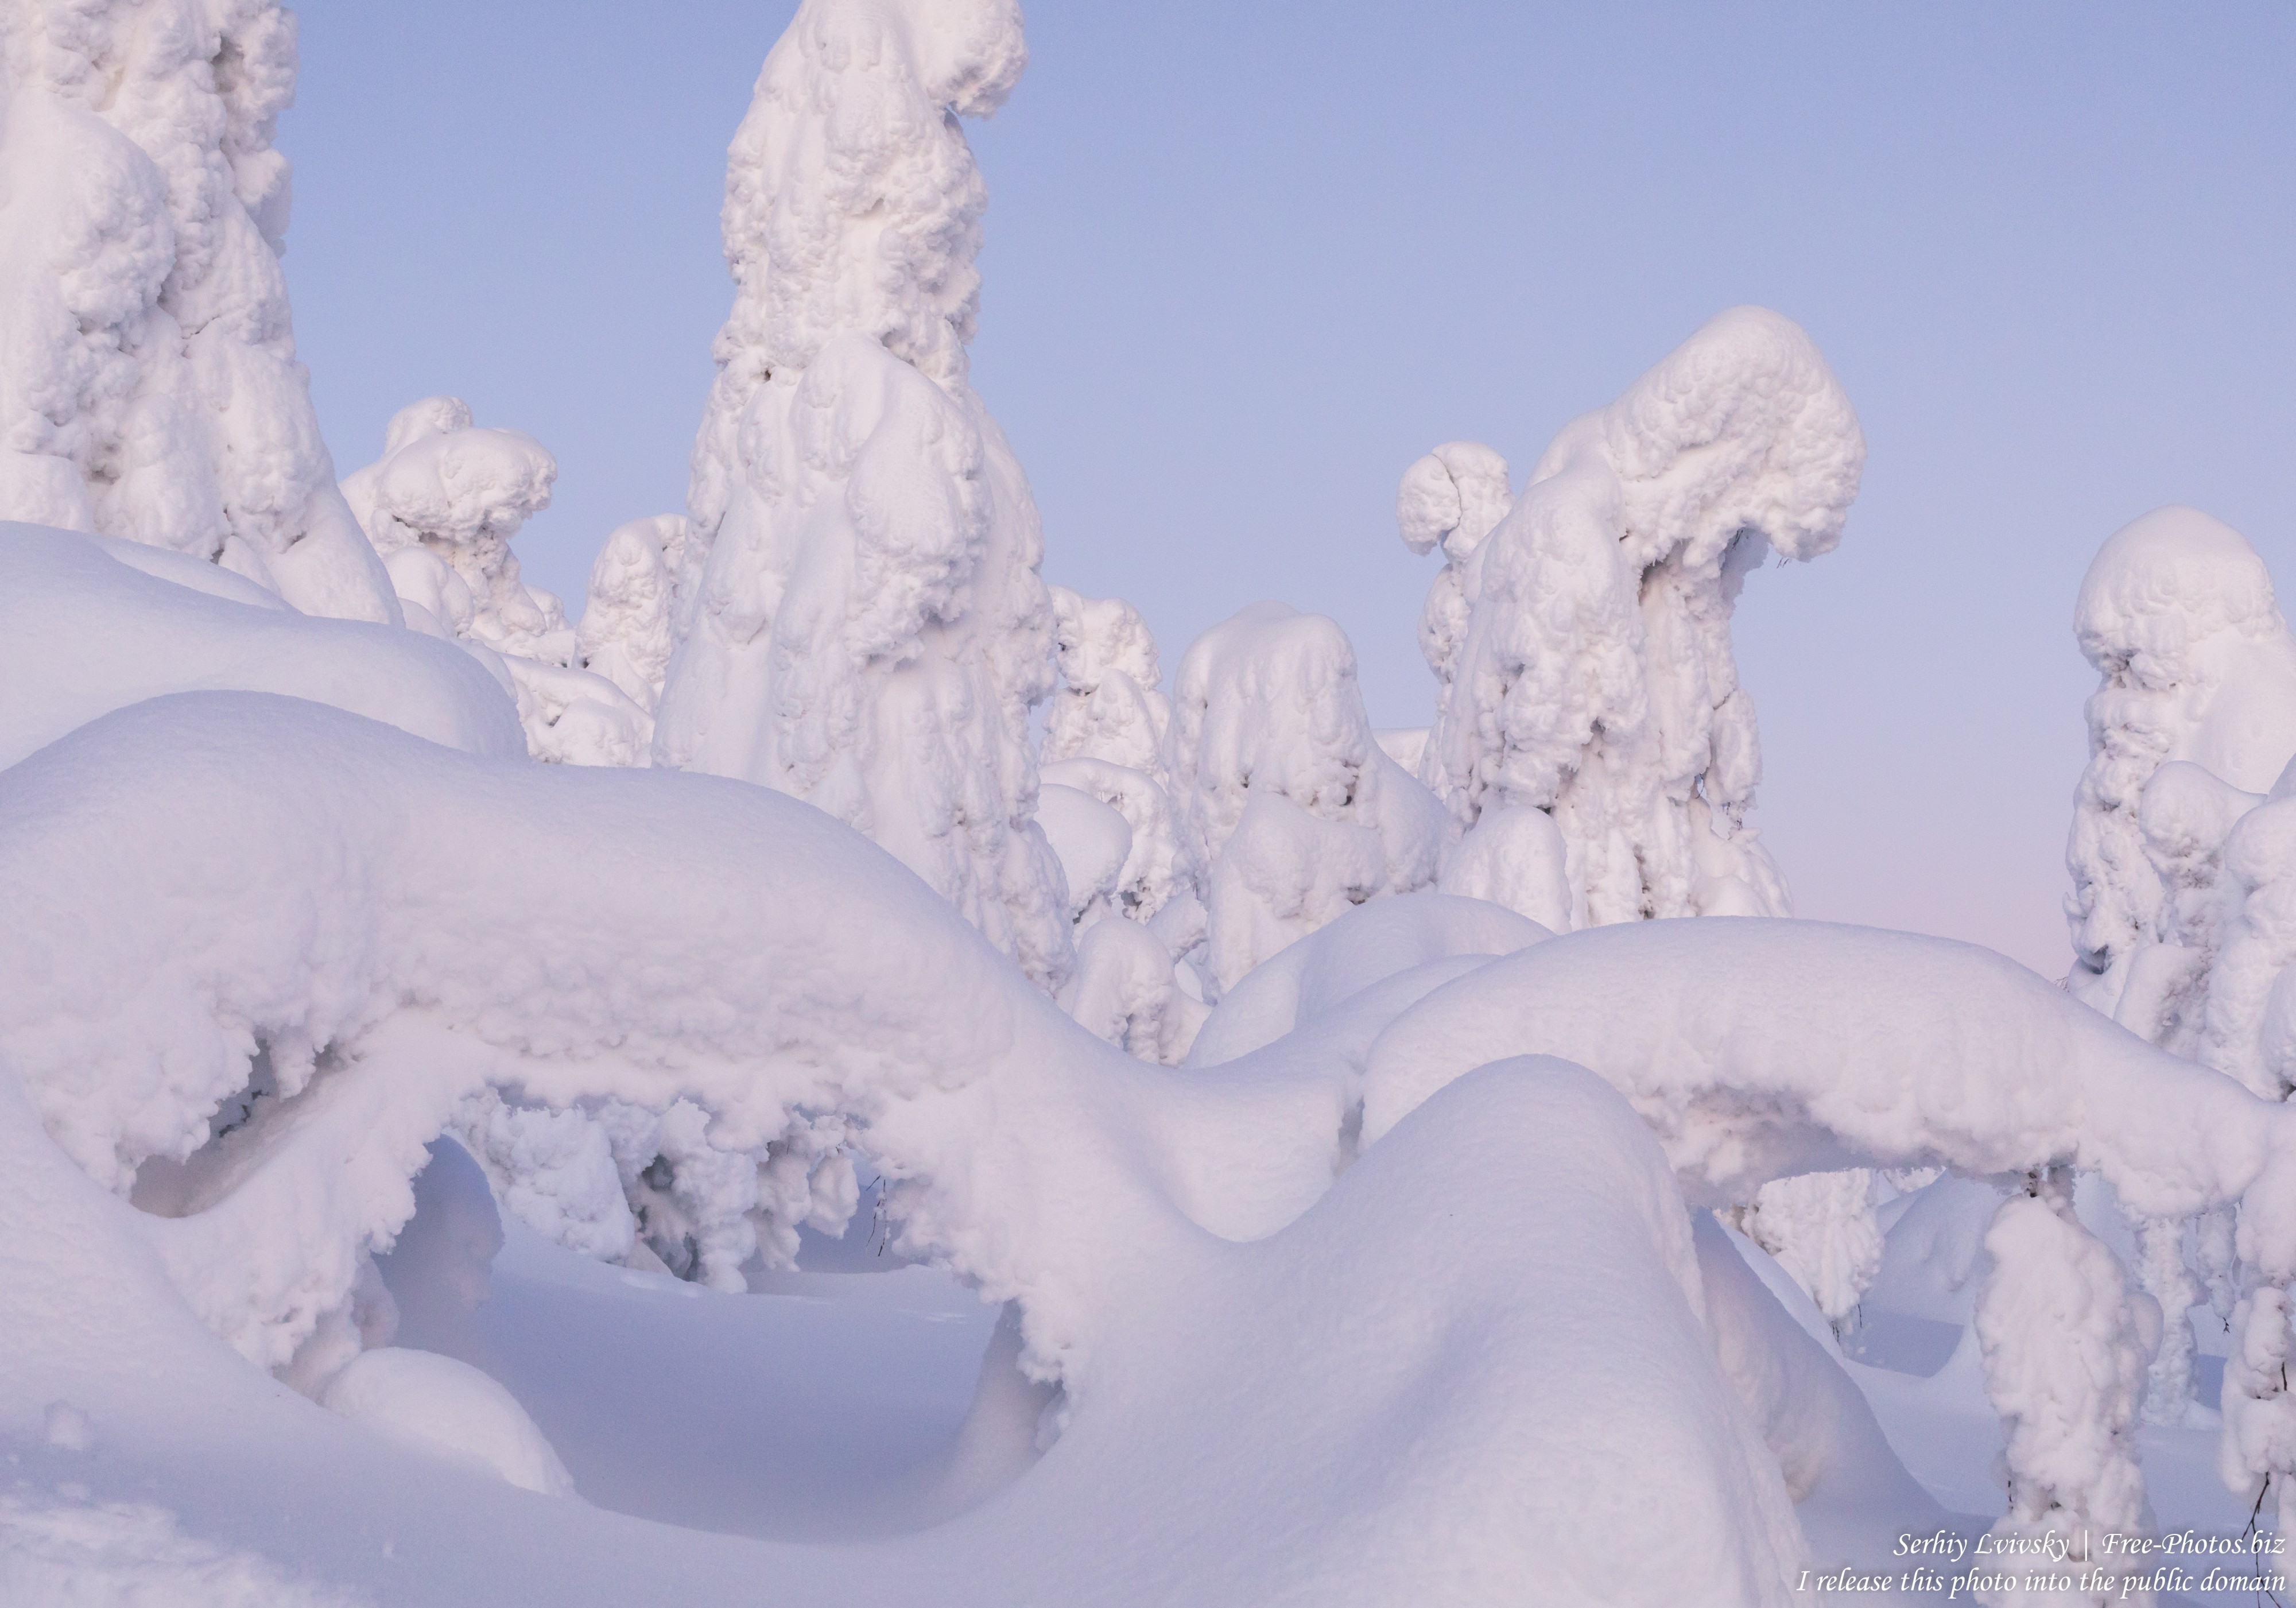 Valtavaara, Finland, photographed in January 2020 by Serhiy Lvivsky, picture 8